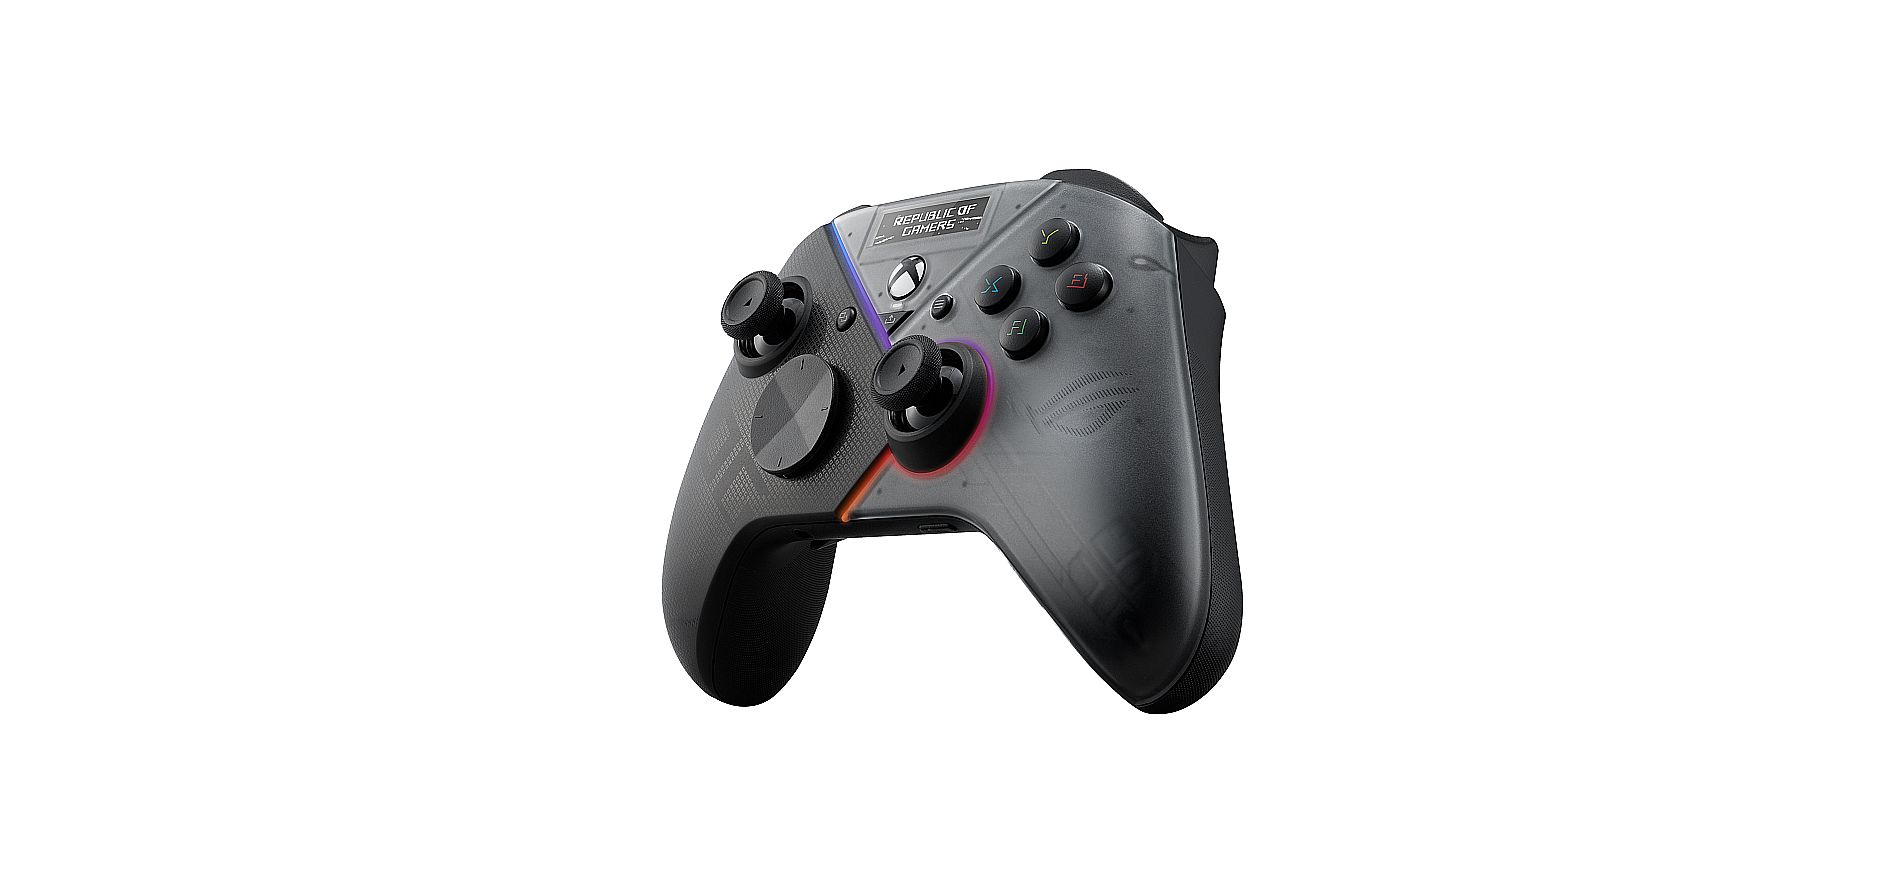 ASUS ROG Raikiri Pro controller for Xbox features a built-in OLED 